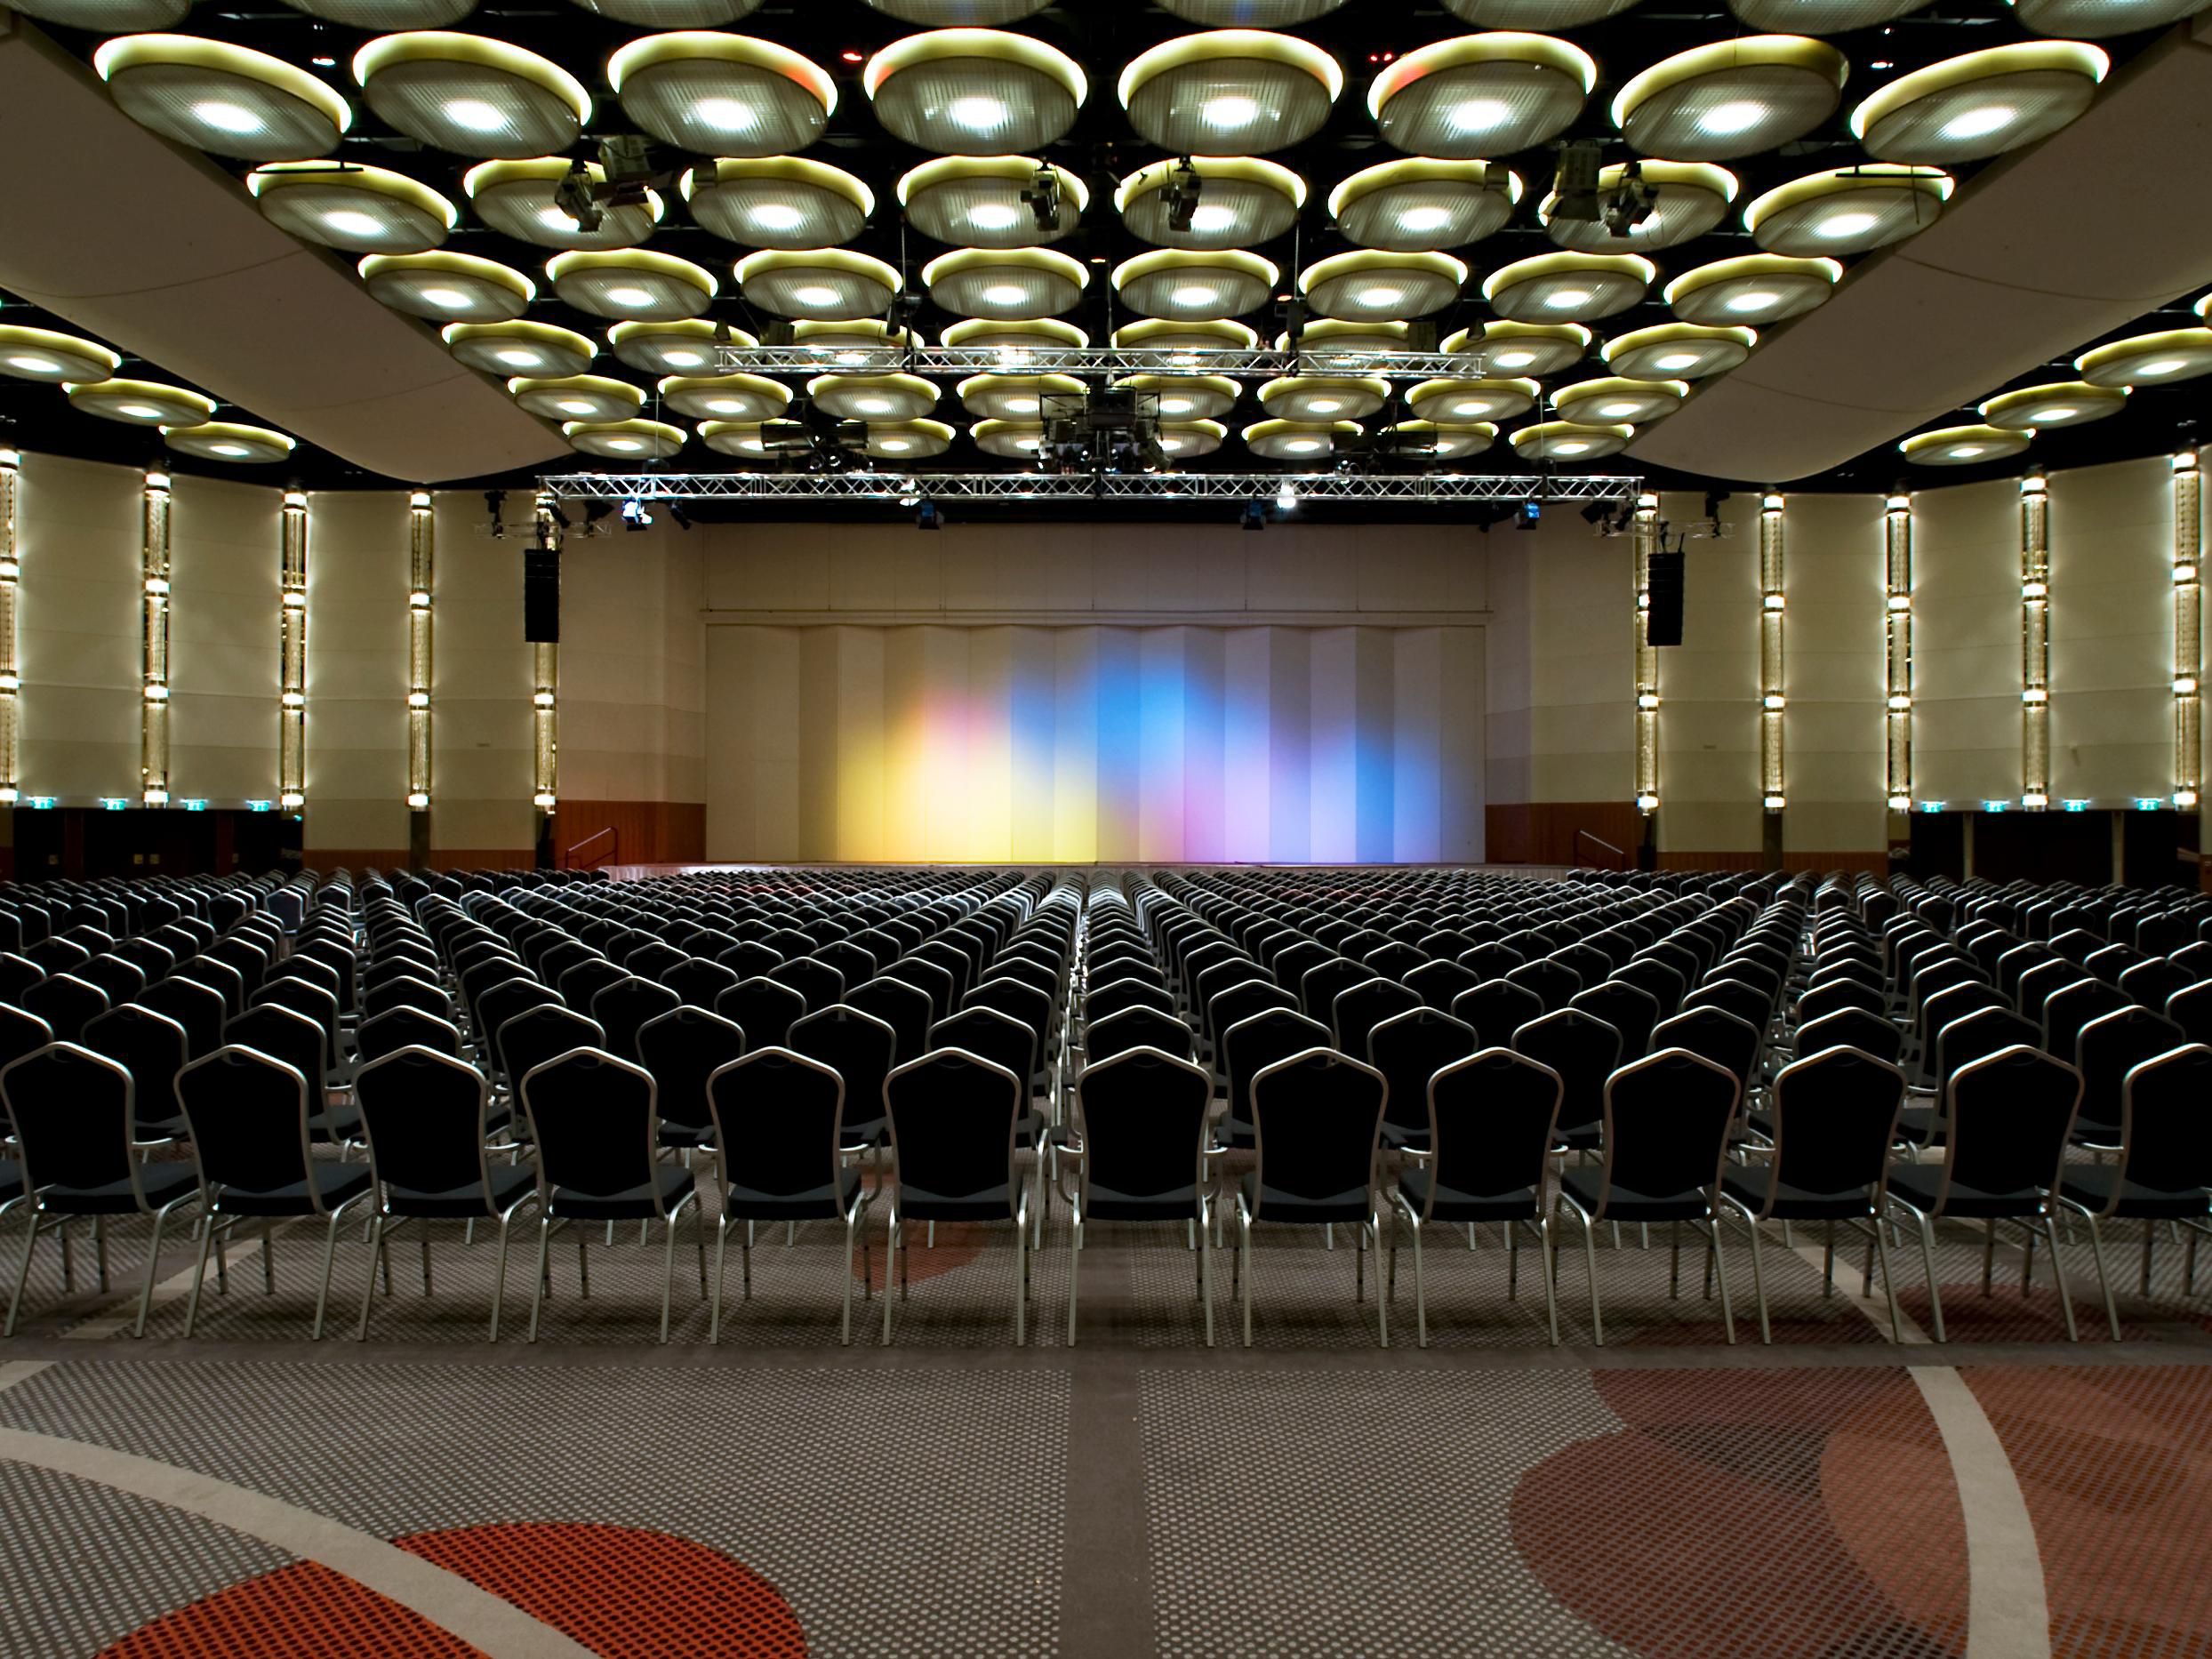 With 14 meeting rooms and two ballrooms spread over a total area of 4,000 m², we are one of the largest conference hotels in the federal state of North Rhine-Westphalia. Our rooms can be individually combined and decorated, which makes them a suitable location for any event.